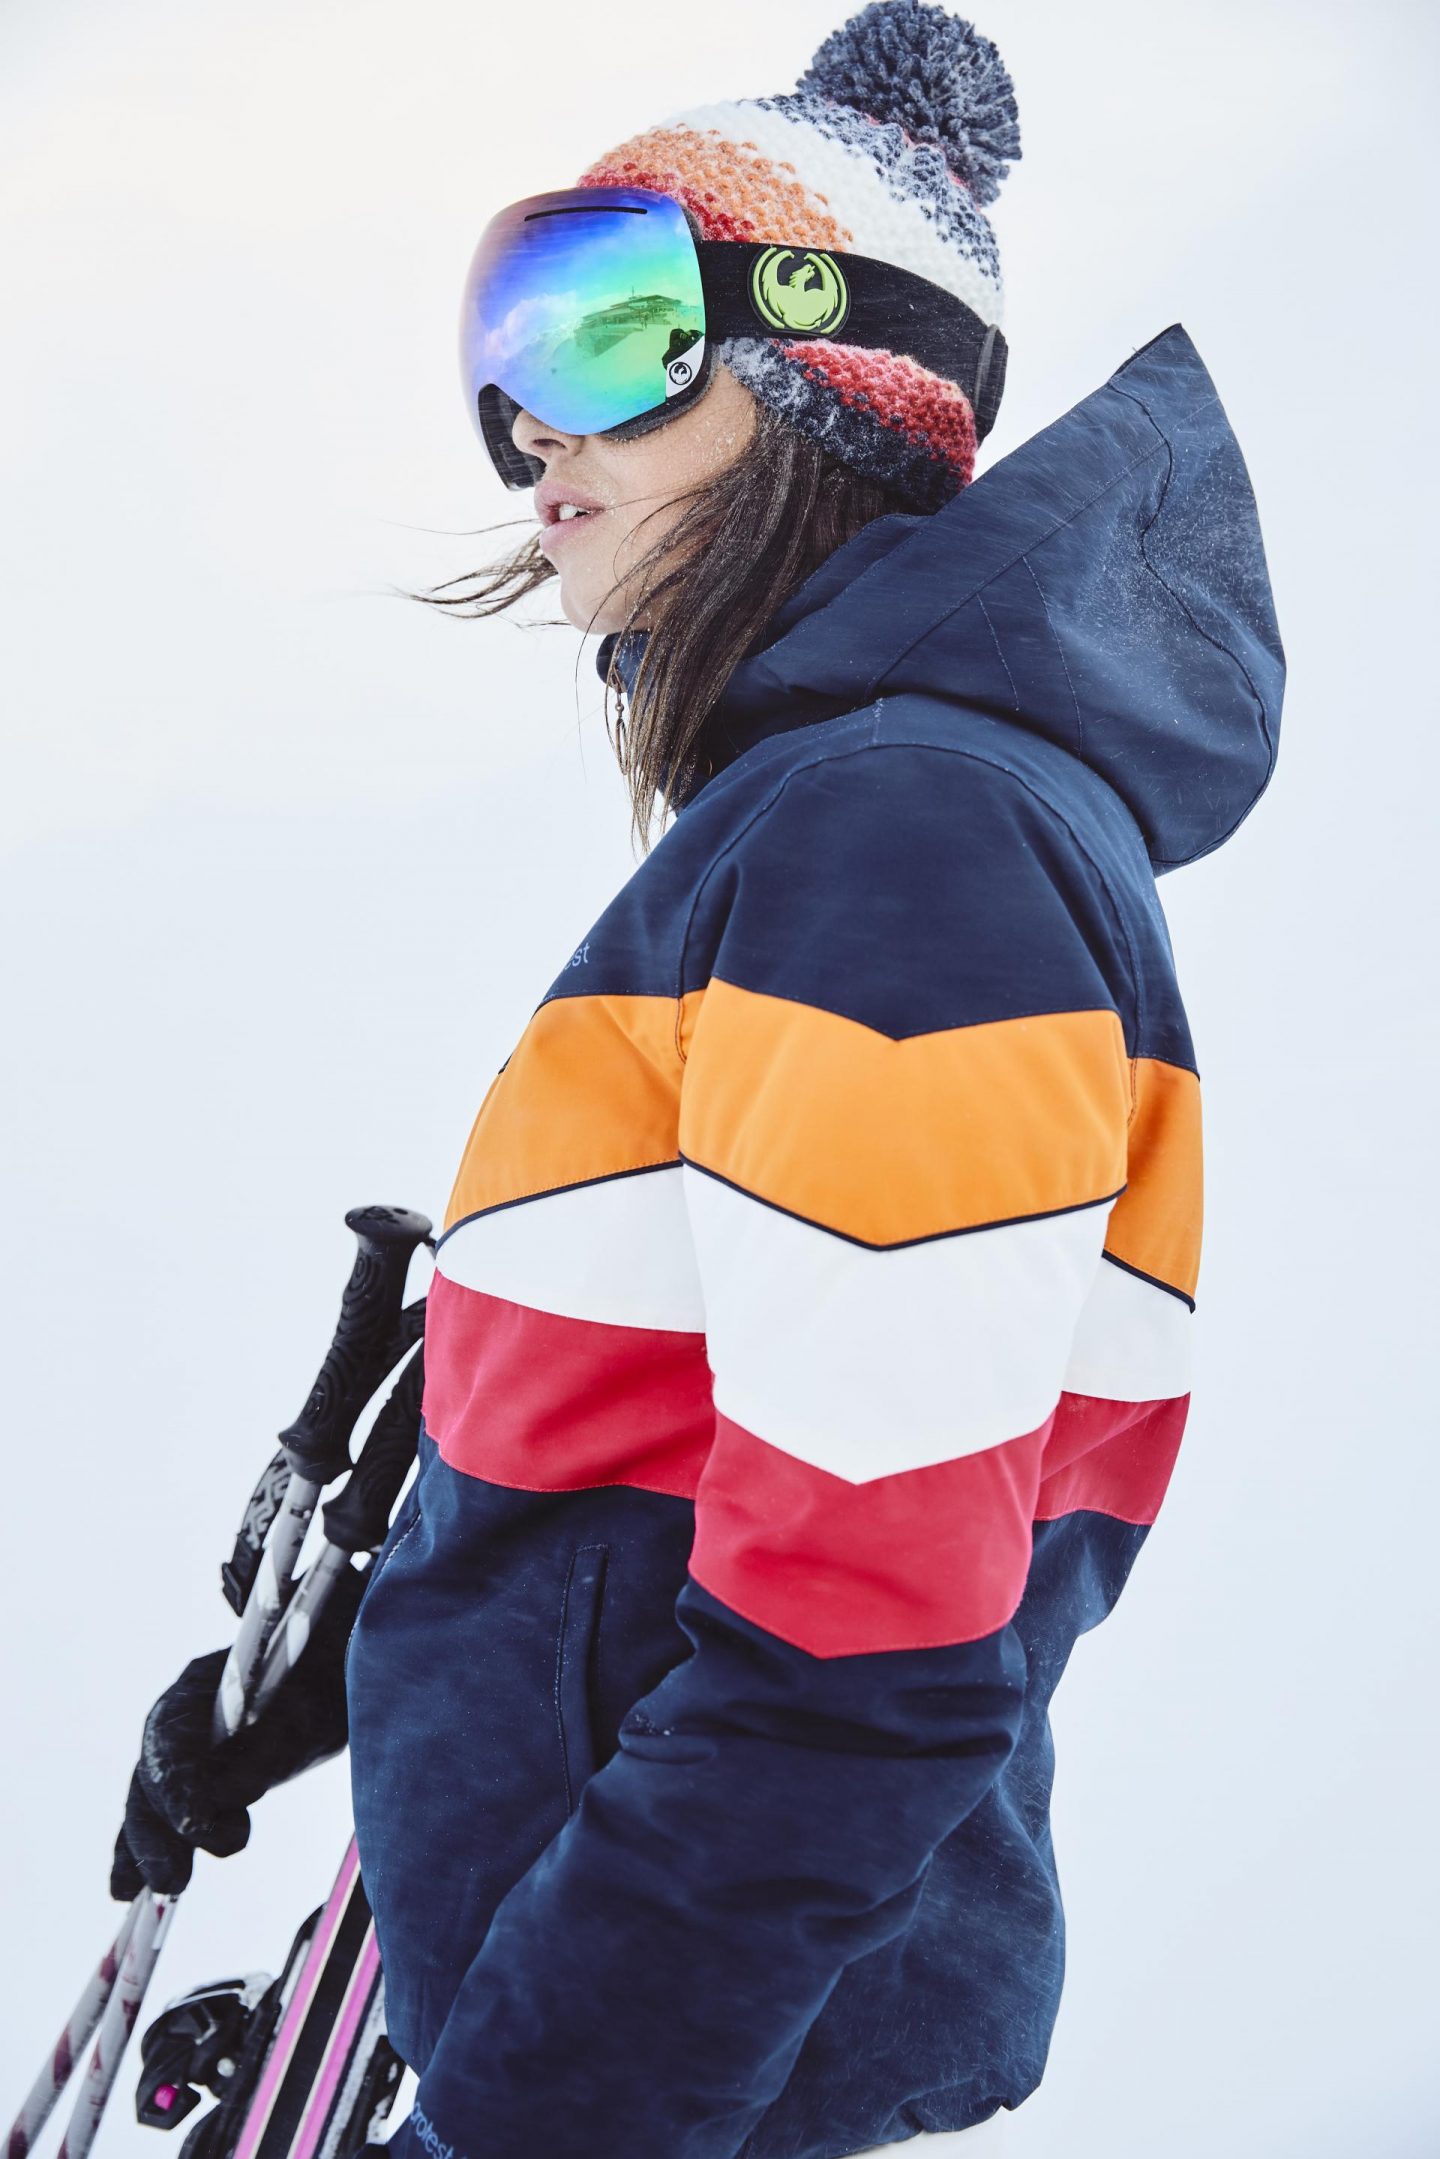 Best Women's Ski Gear | Best snowsports clothes for 2020 reviewed by The Girl Outdoors, Sian Lewis, for The Independent